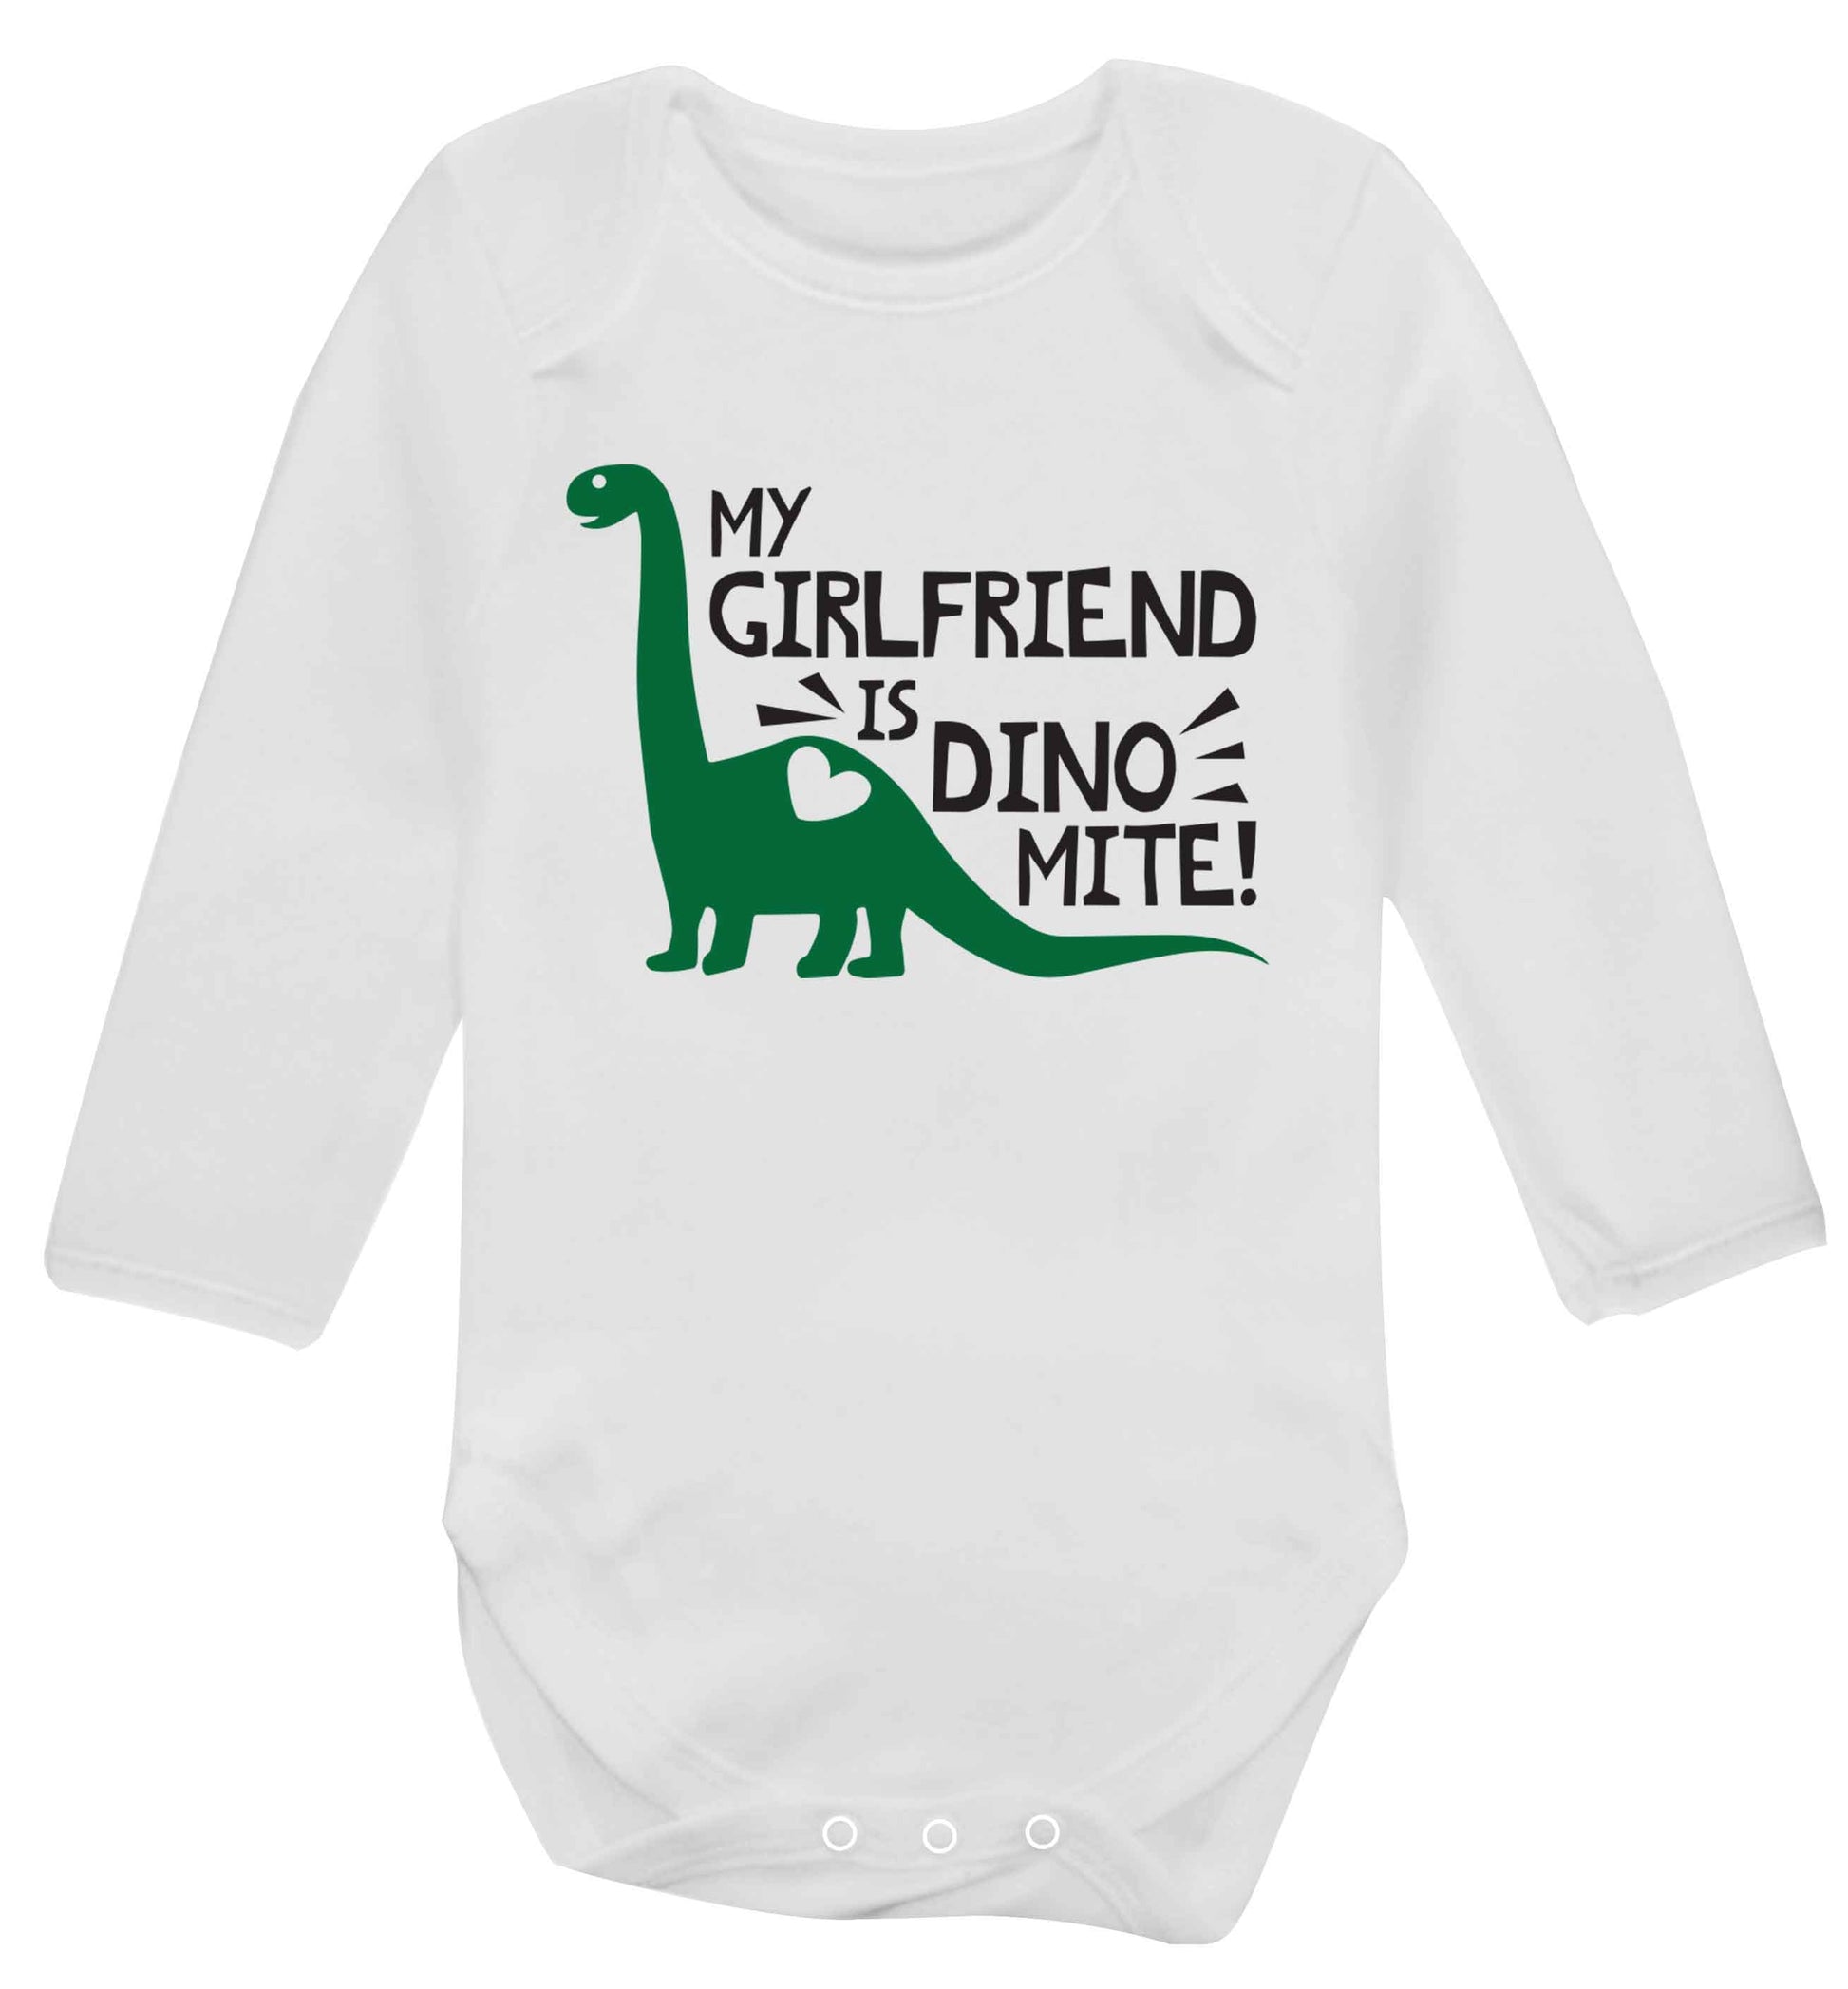 My girlfriend is dinomite! Baby Vest long sleeved white 6-12 months